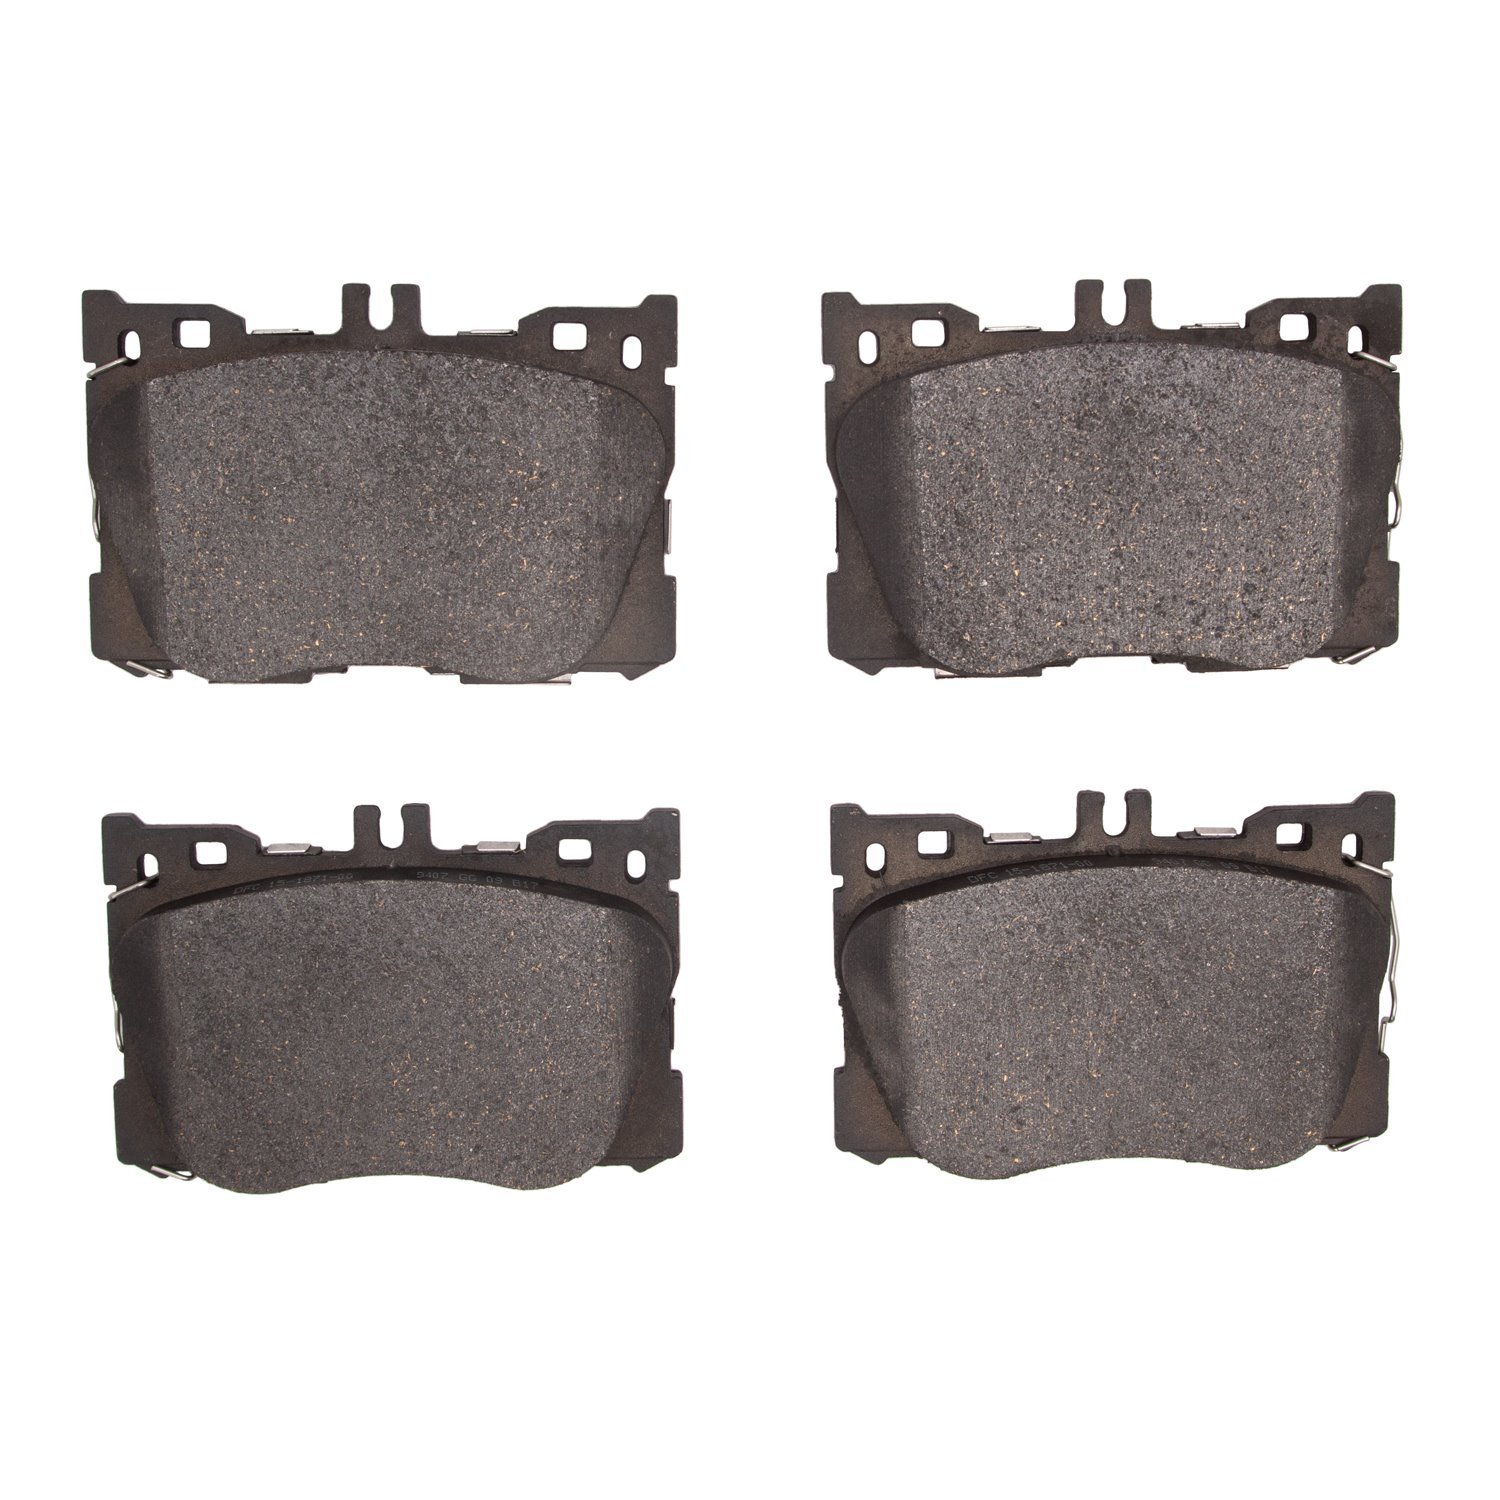 Semi-Metallic Brake Pads, Fits Select Mercedes-Benz, Position: Front